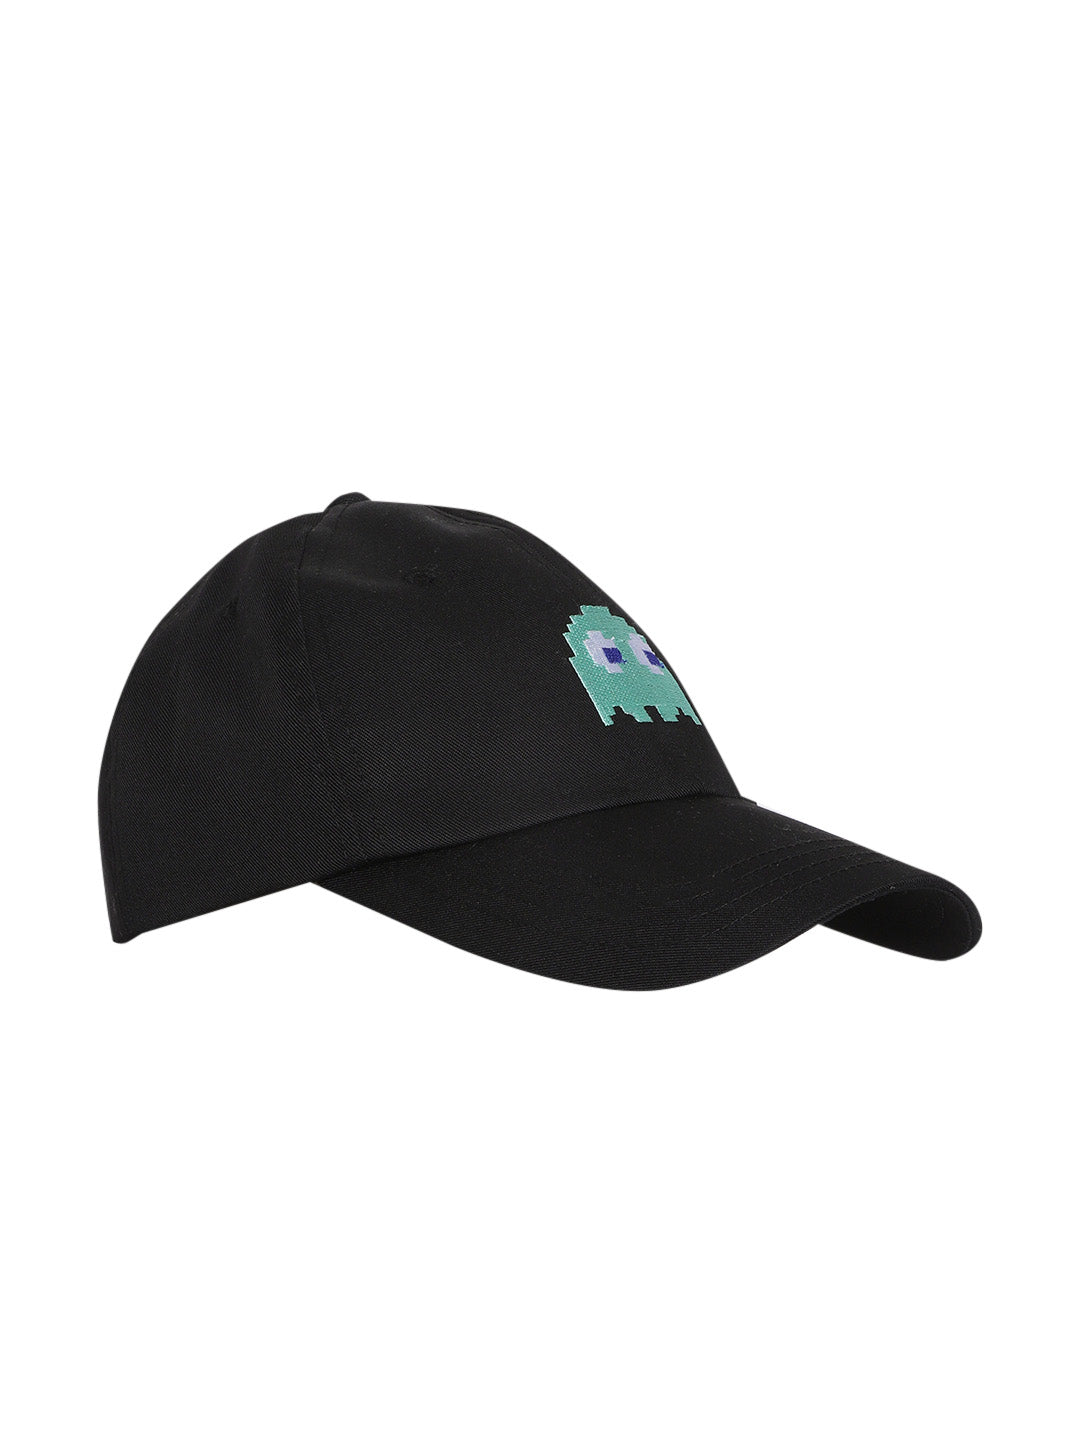 Blueberry Black Pac-Man embroidered baseball cap